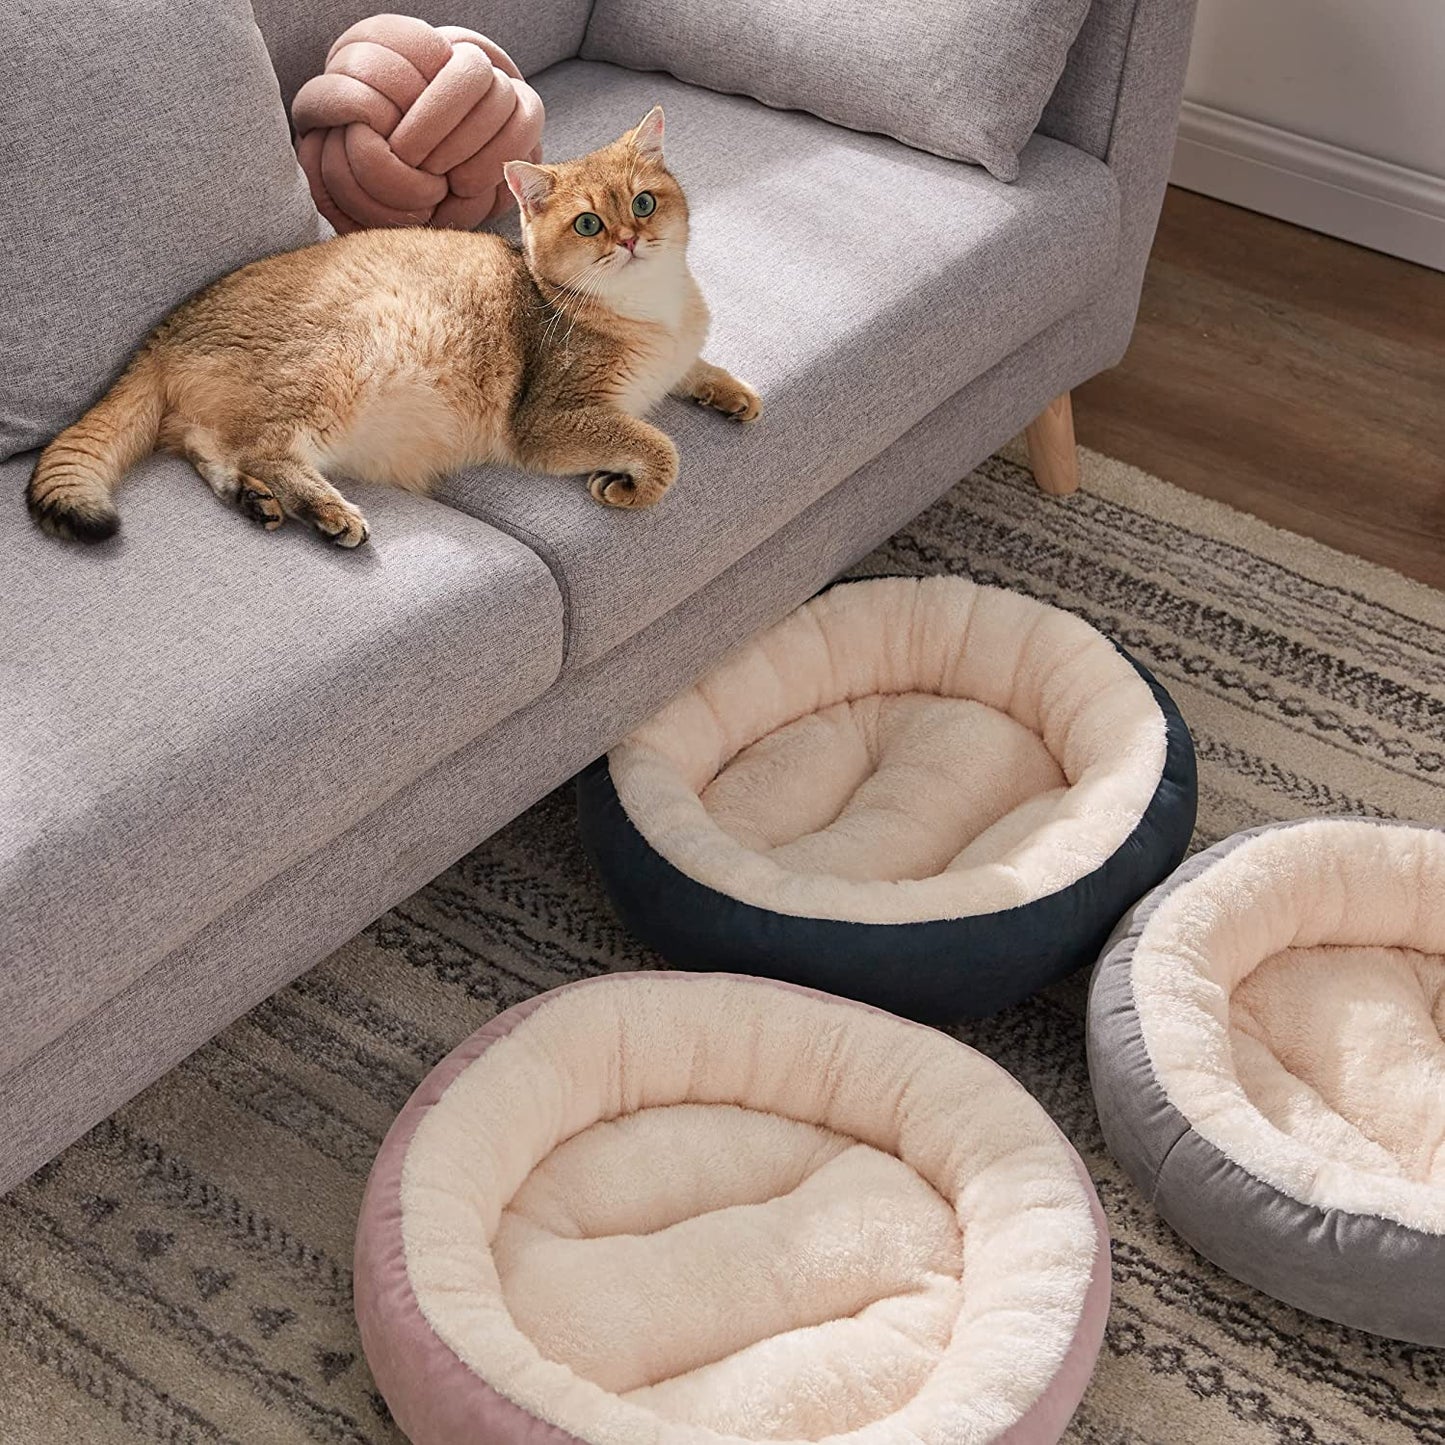 Cat Bed for Indoor Cats, Machine Washable Cat Beds, 20 Inch Pet Bed for Cats or Small Dogs,Anti-Slip & Water-Resistant Bottom